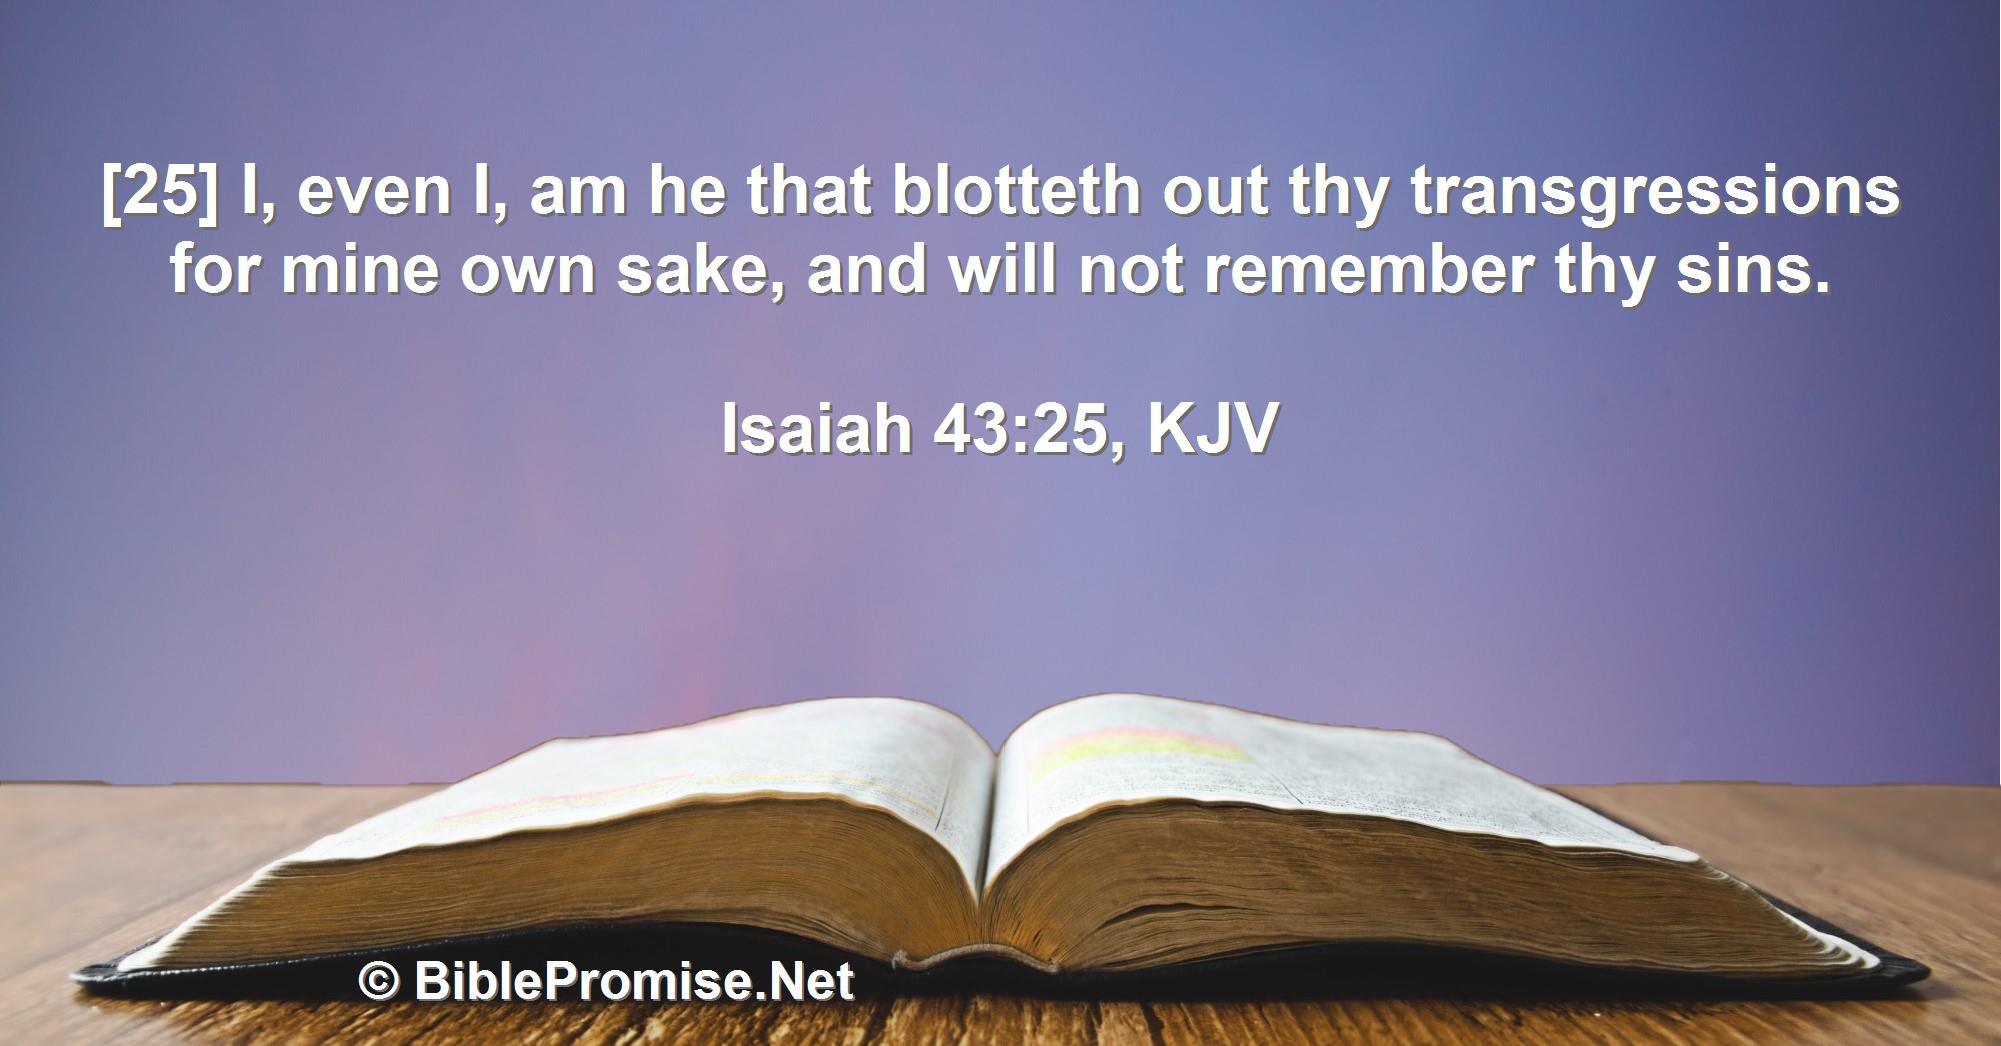 Thursday, August 4, 2022 - Isaiah 43:25 (KJV) - Bible promise that God will not remember sins of His people.